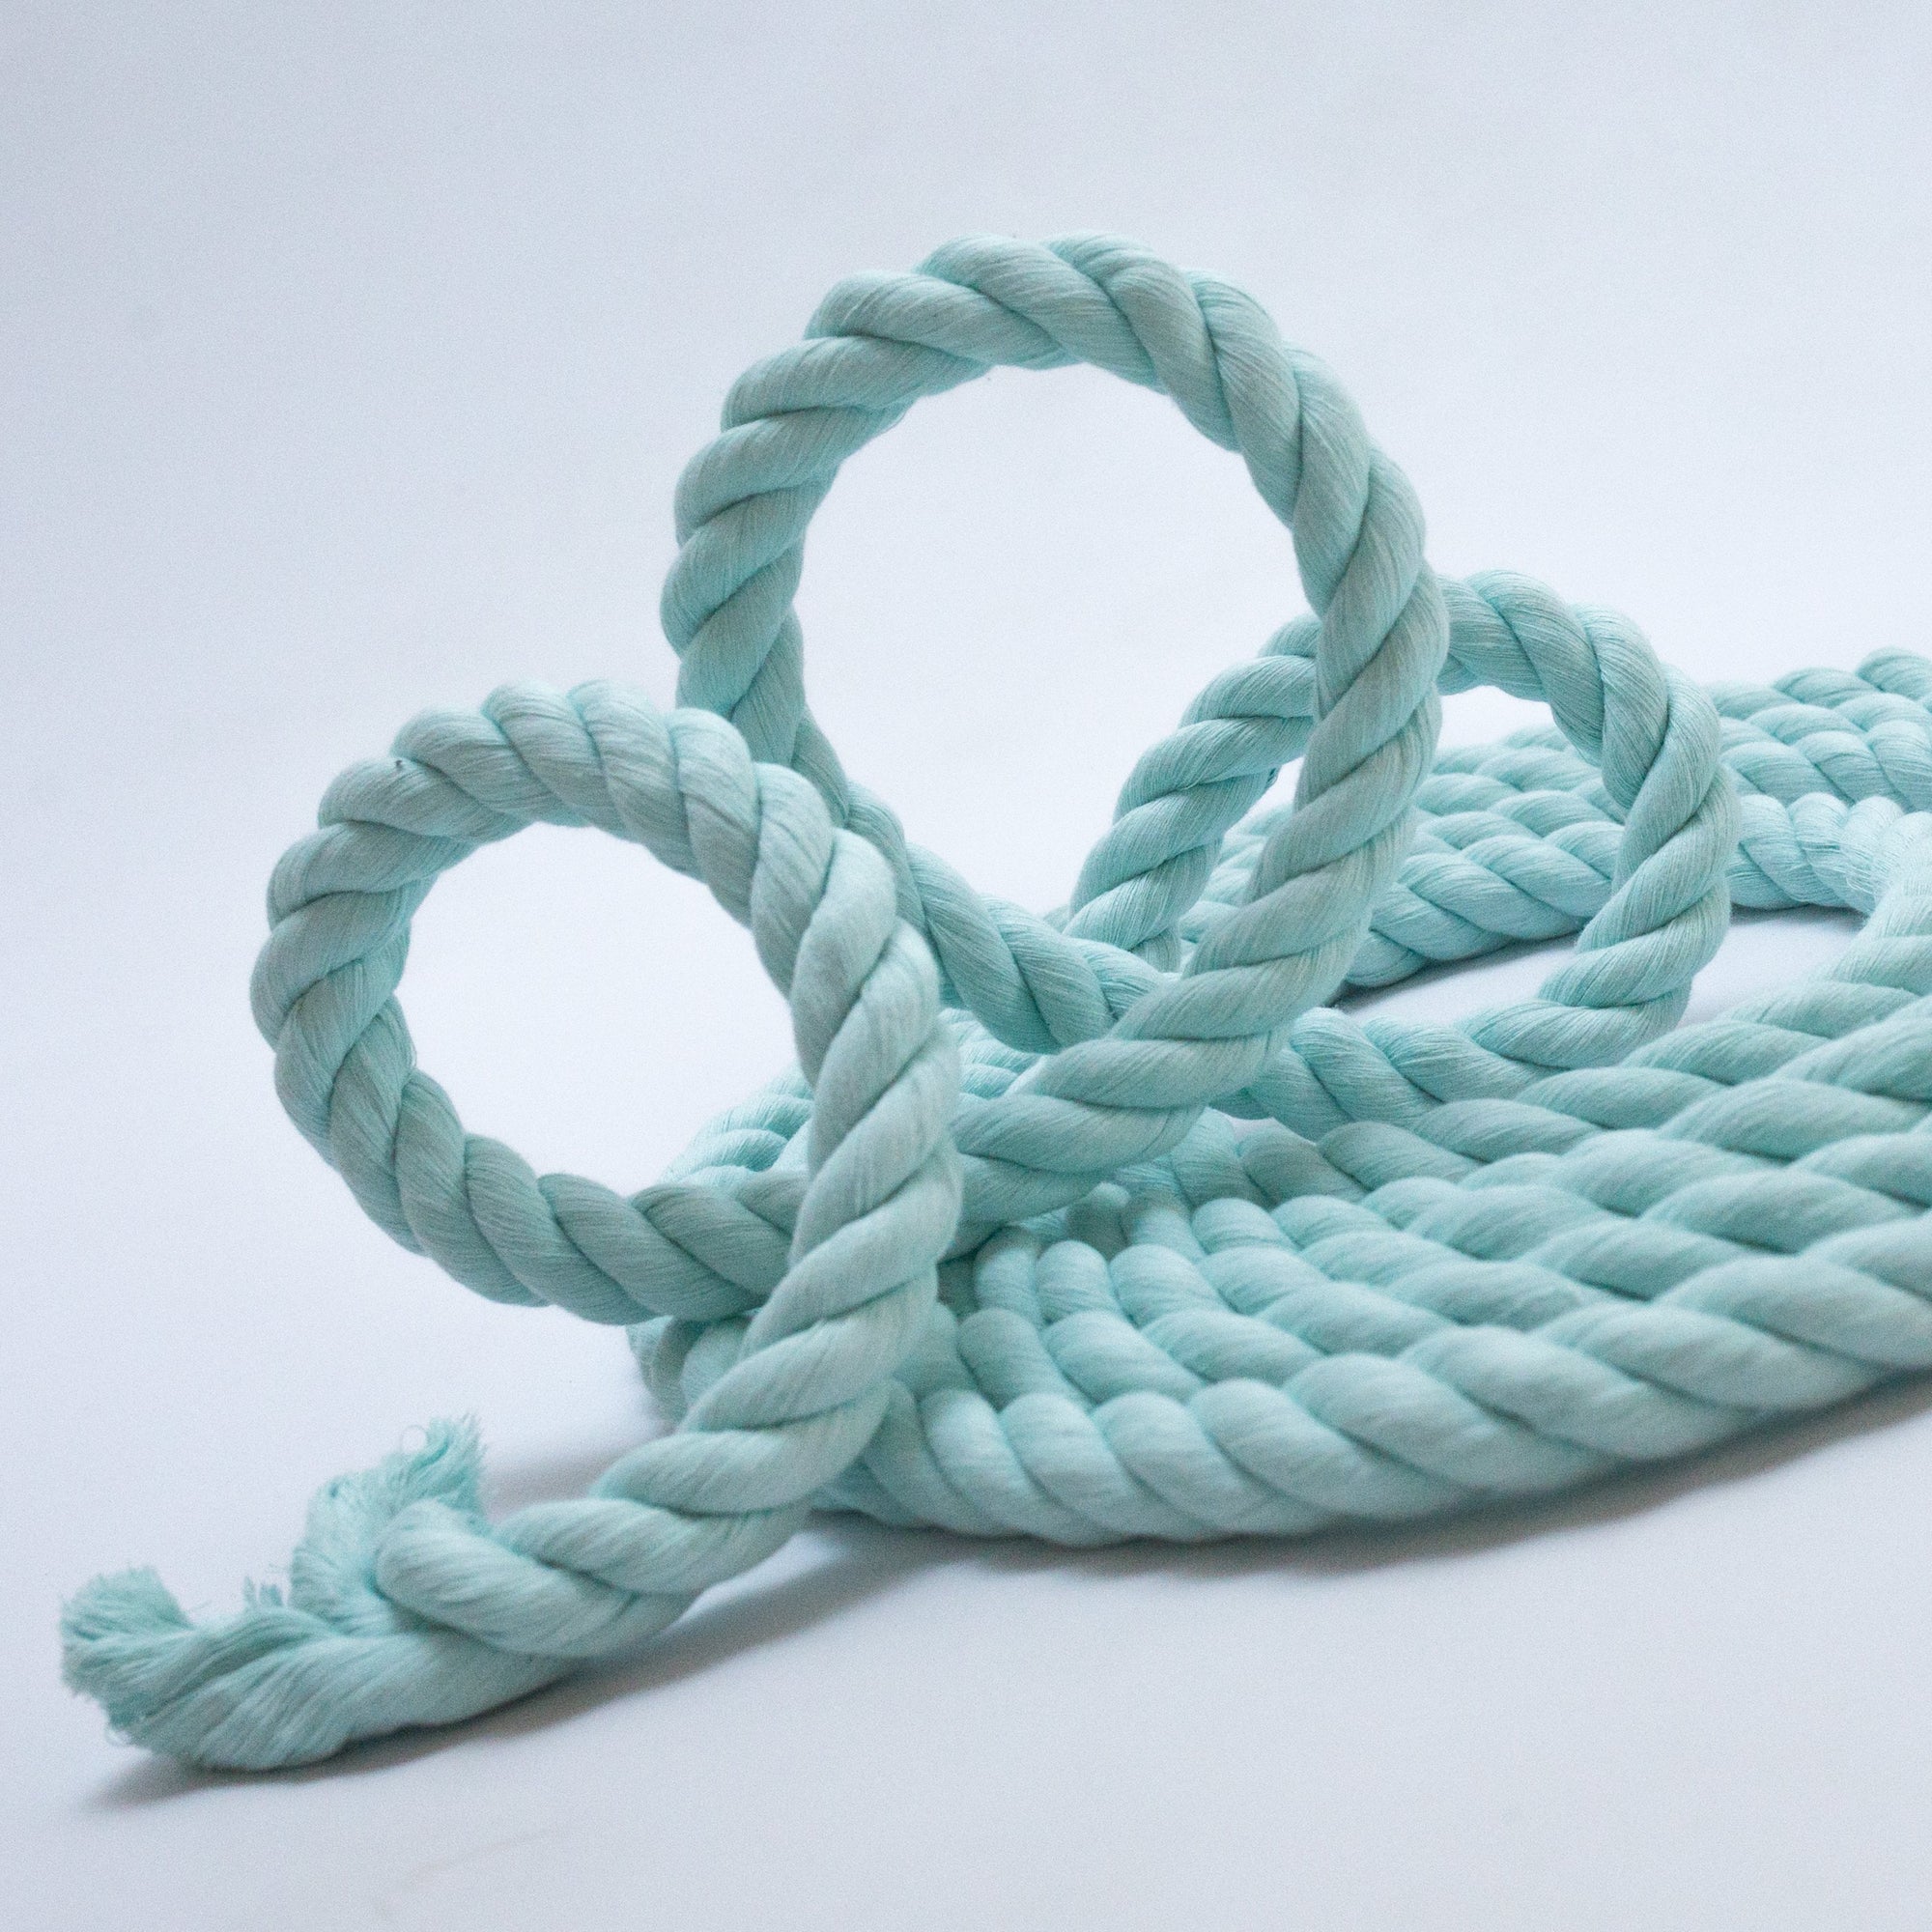 Mary Maker Studio 3Ply Twisted Rope 20mm Coloured Macrame Rope macrame cotton macrame rope macrame workshop macrame patterns macrame